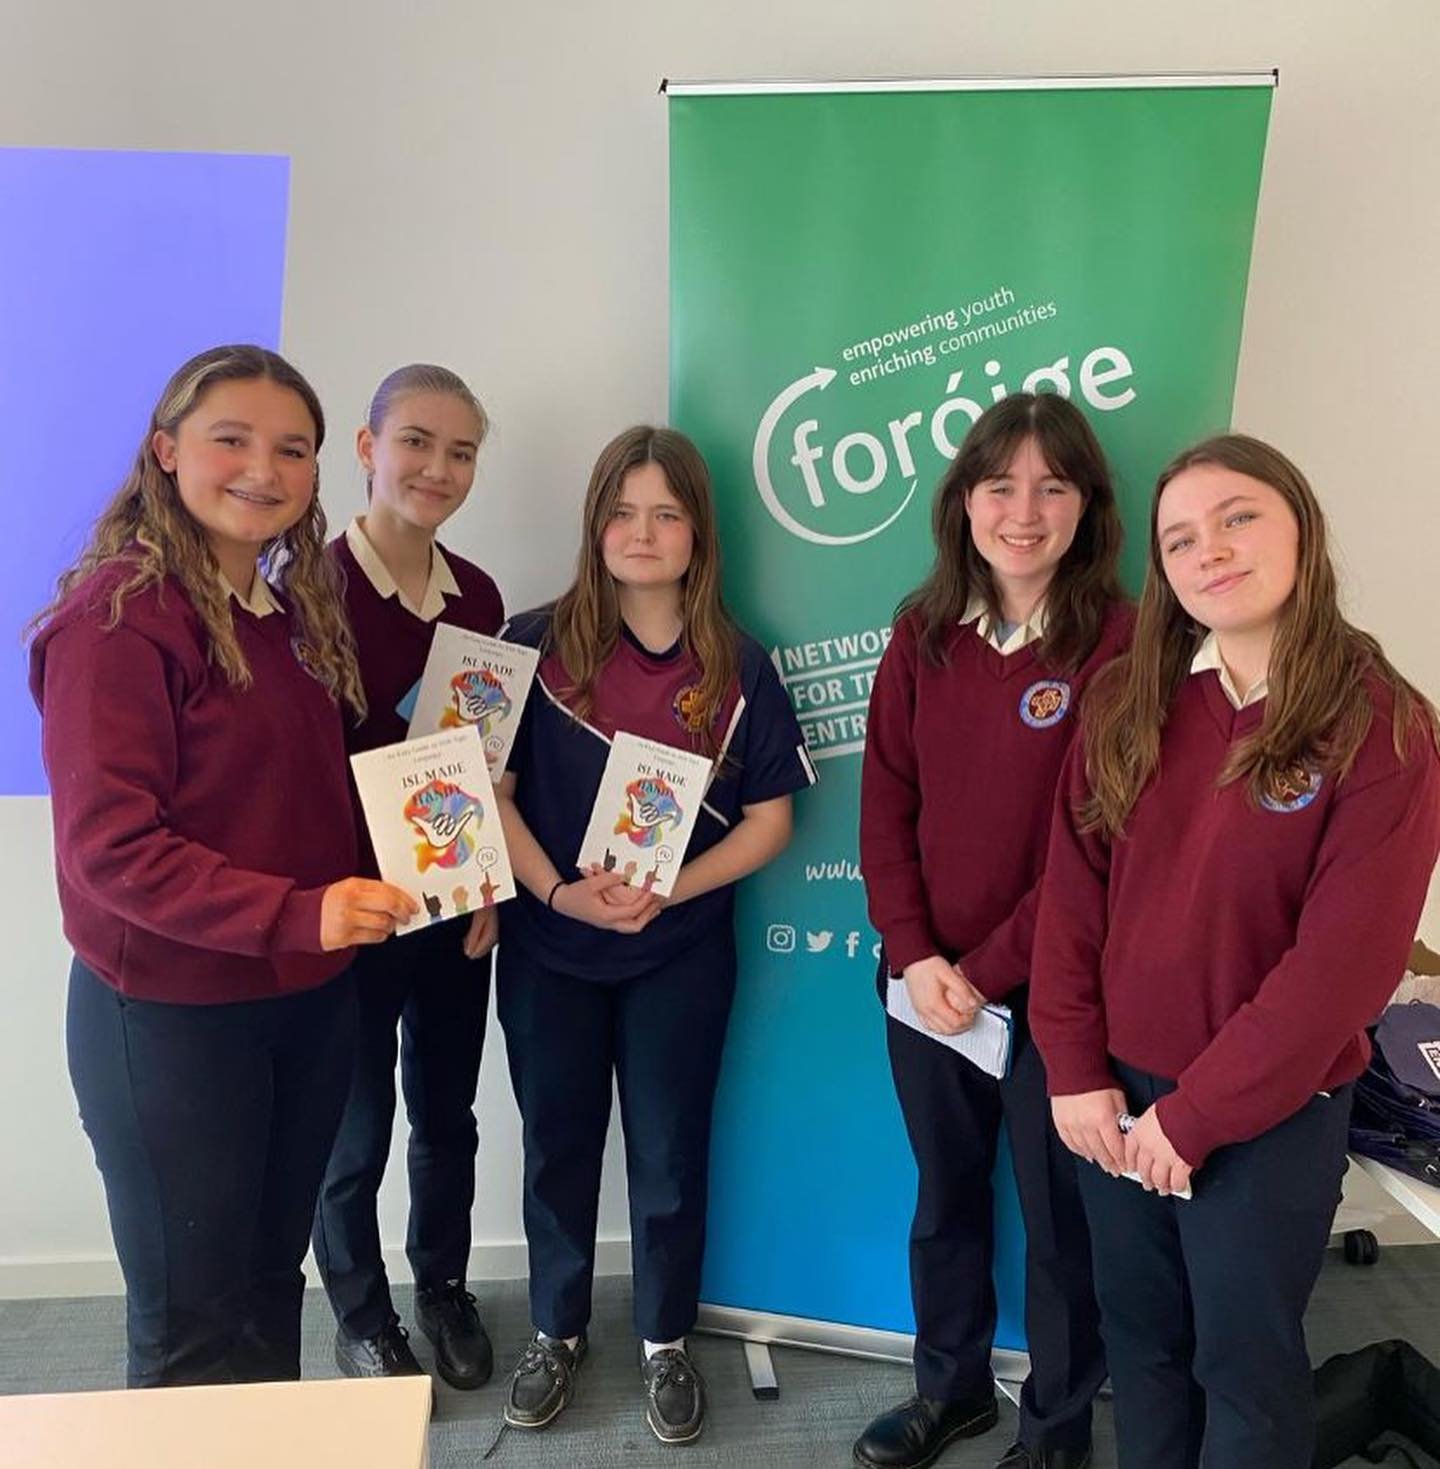 FOROIGE ENTREPRENEURS 😀Huge congratulations and well done to our 3 TY groups who really impressed the judges in the Regional Finals of the Foroige Entrepreneurs competition 
&nbsp;
*Eco Explorers* won best innovation
*ISL Made Handy* won best social